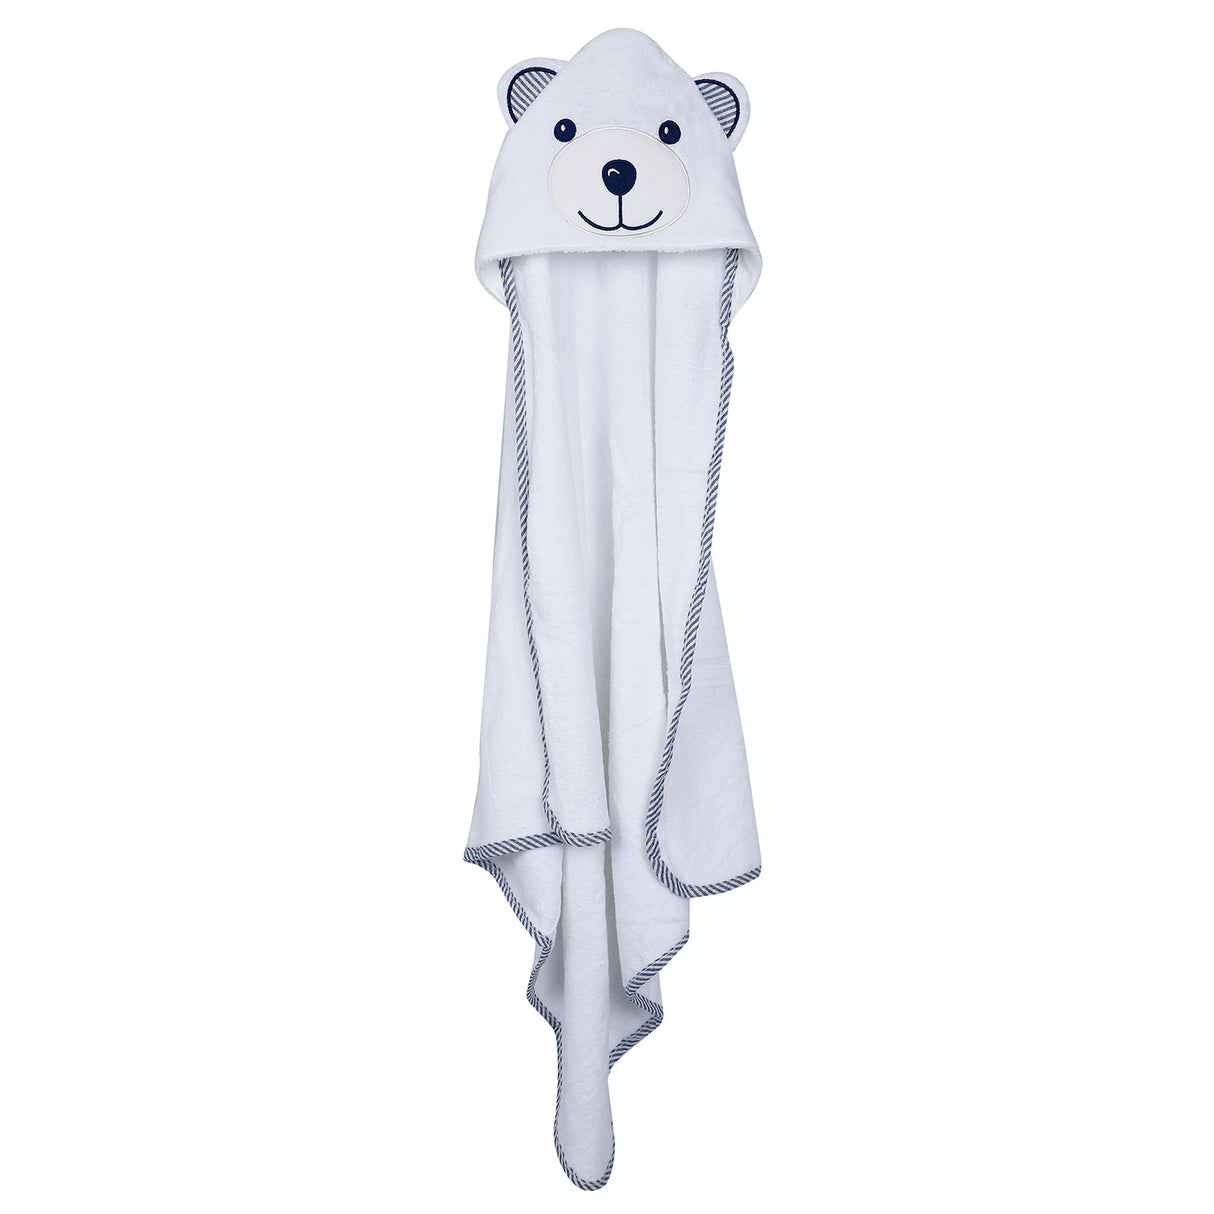 Moms Care Hooded Towel